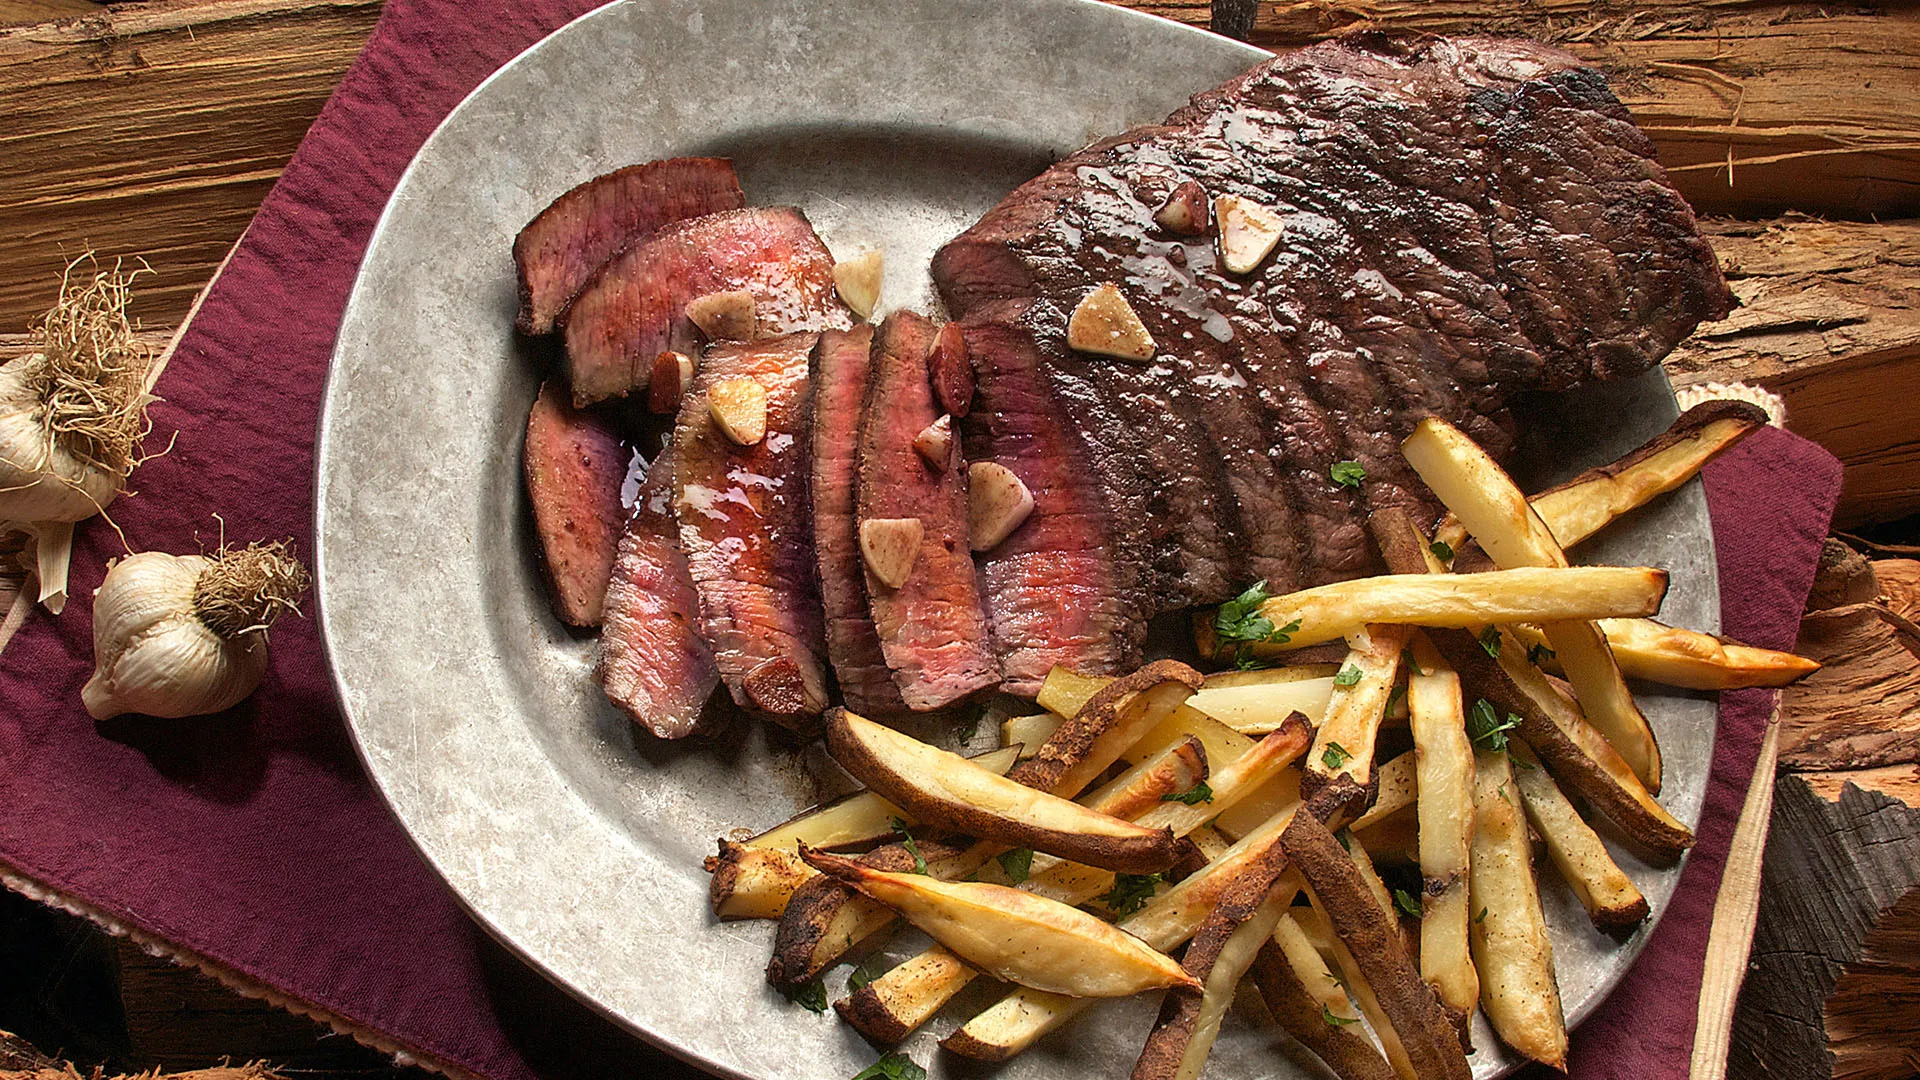 Photo Of Steak And French Fries On Grey Plate